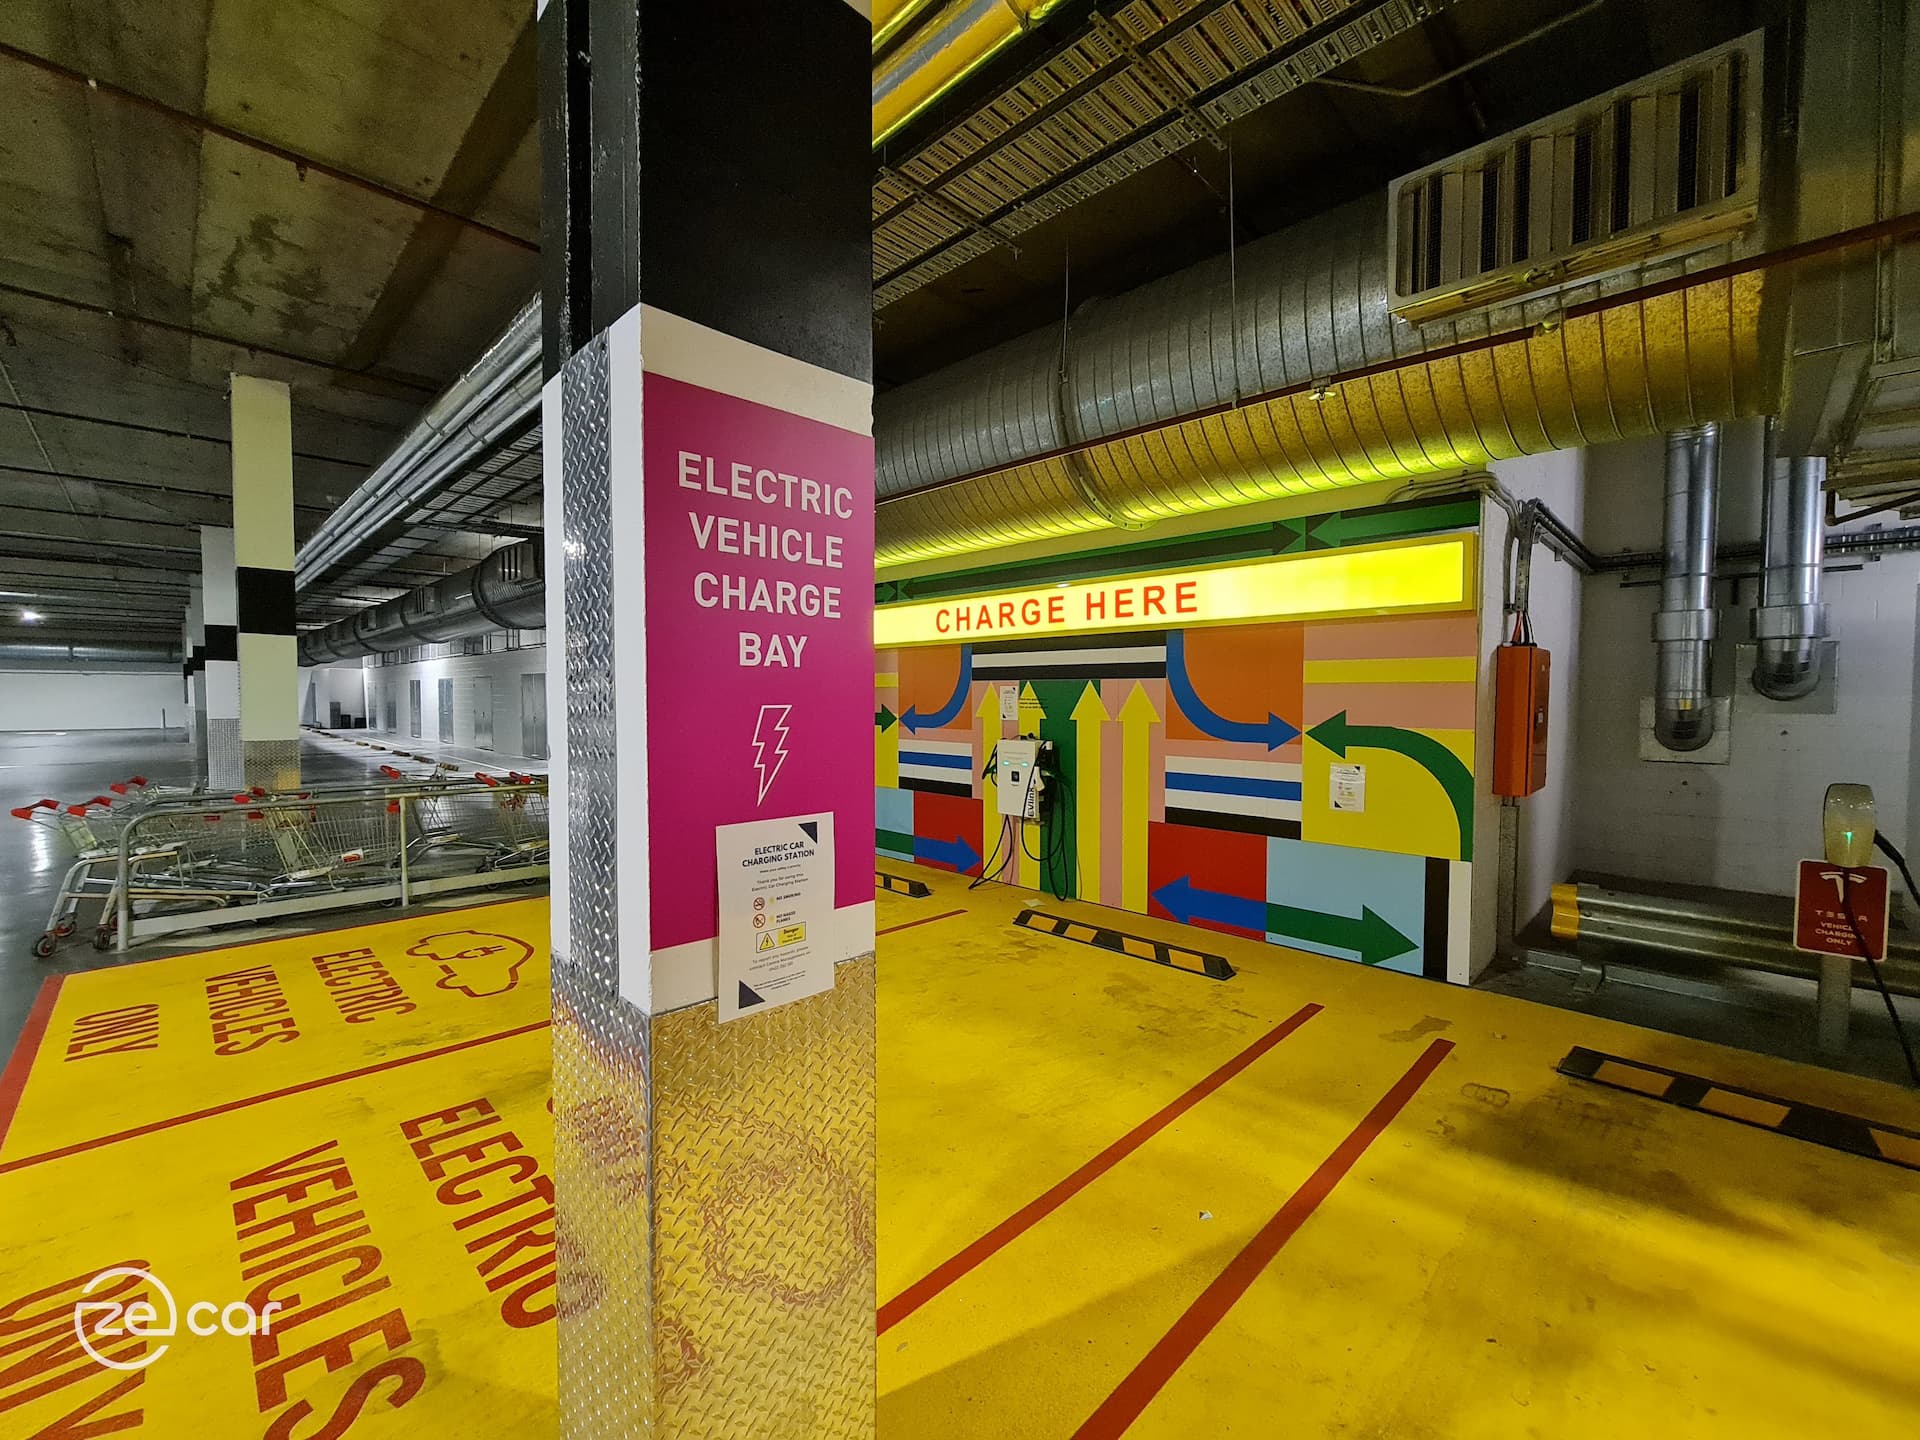 EV AC charger with yellow 'Charge Here' sign and pink 'Electric Vehicle Charge Bay' sign